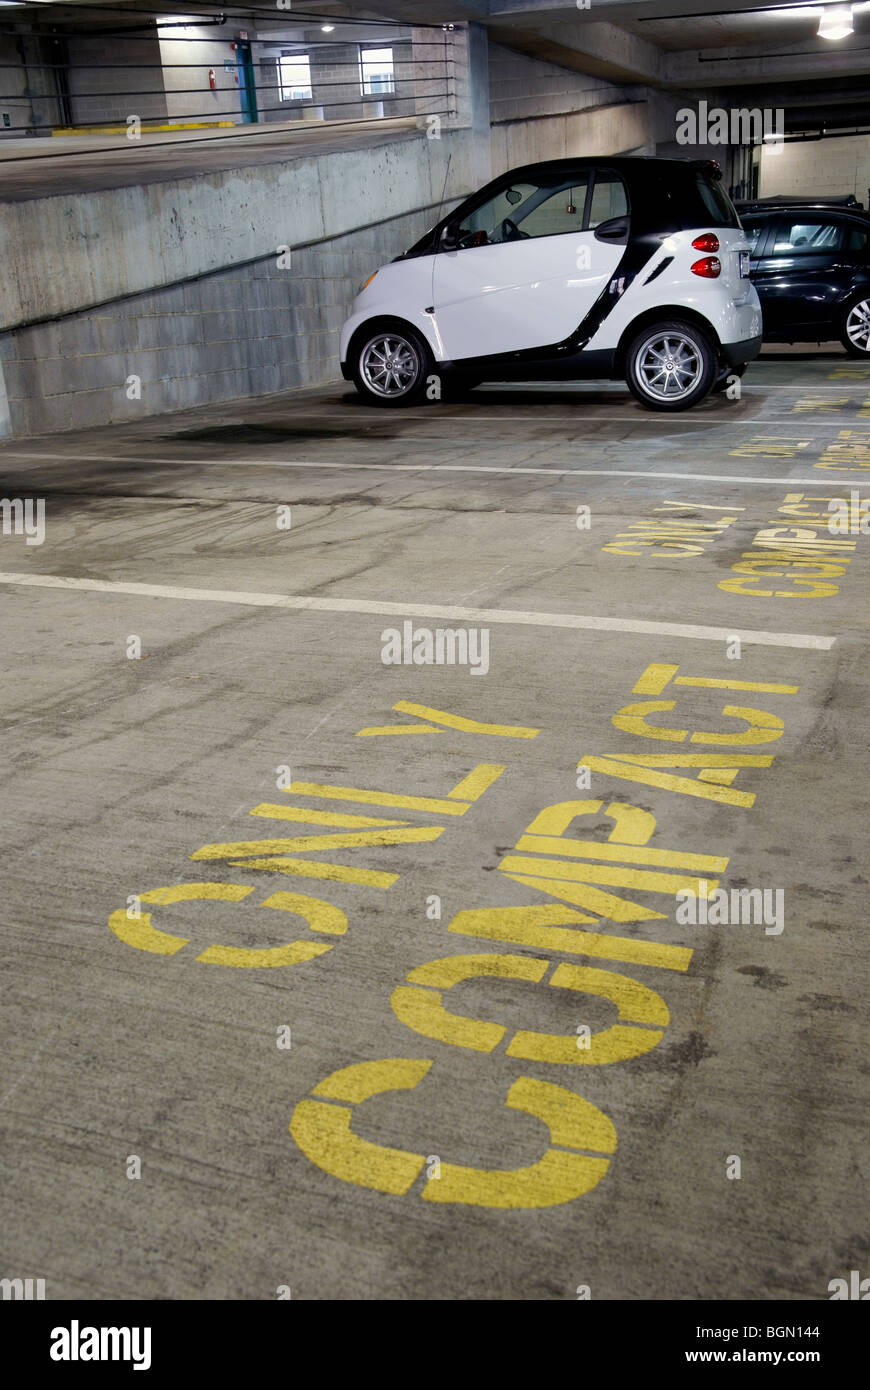 Compact car in parking garage Stock Photo